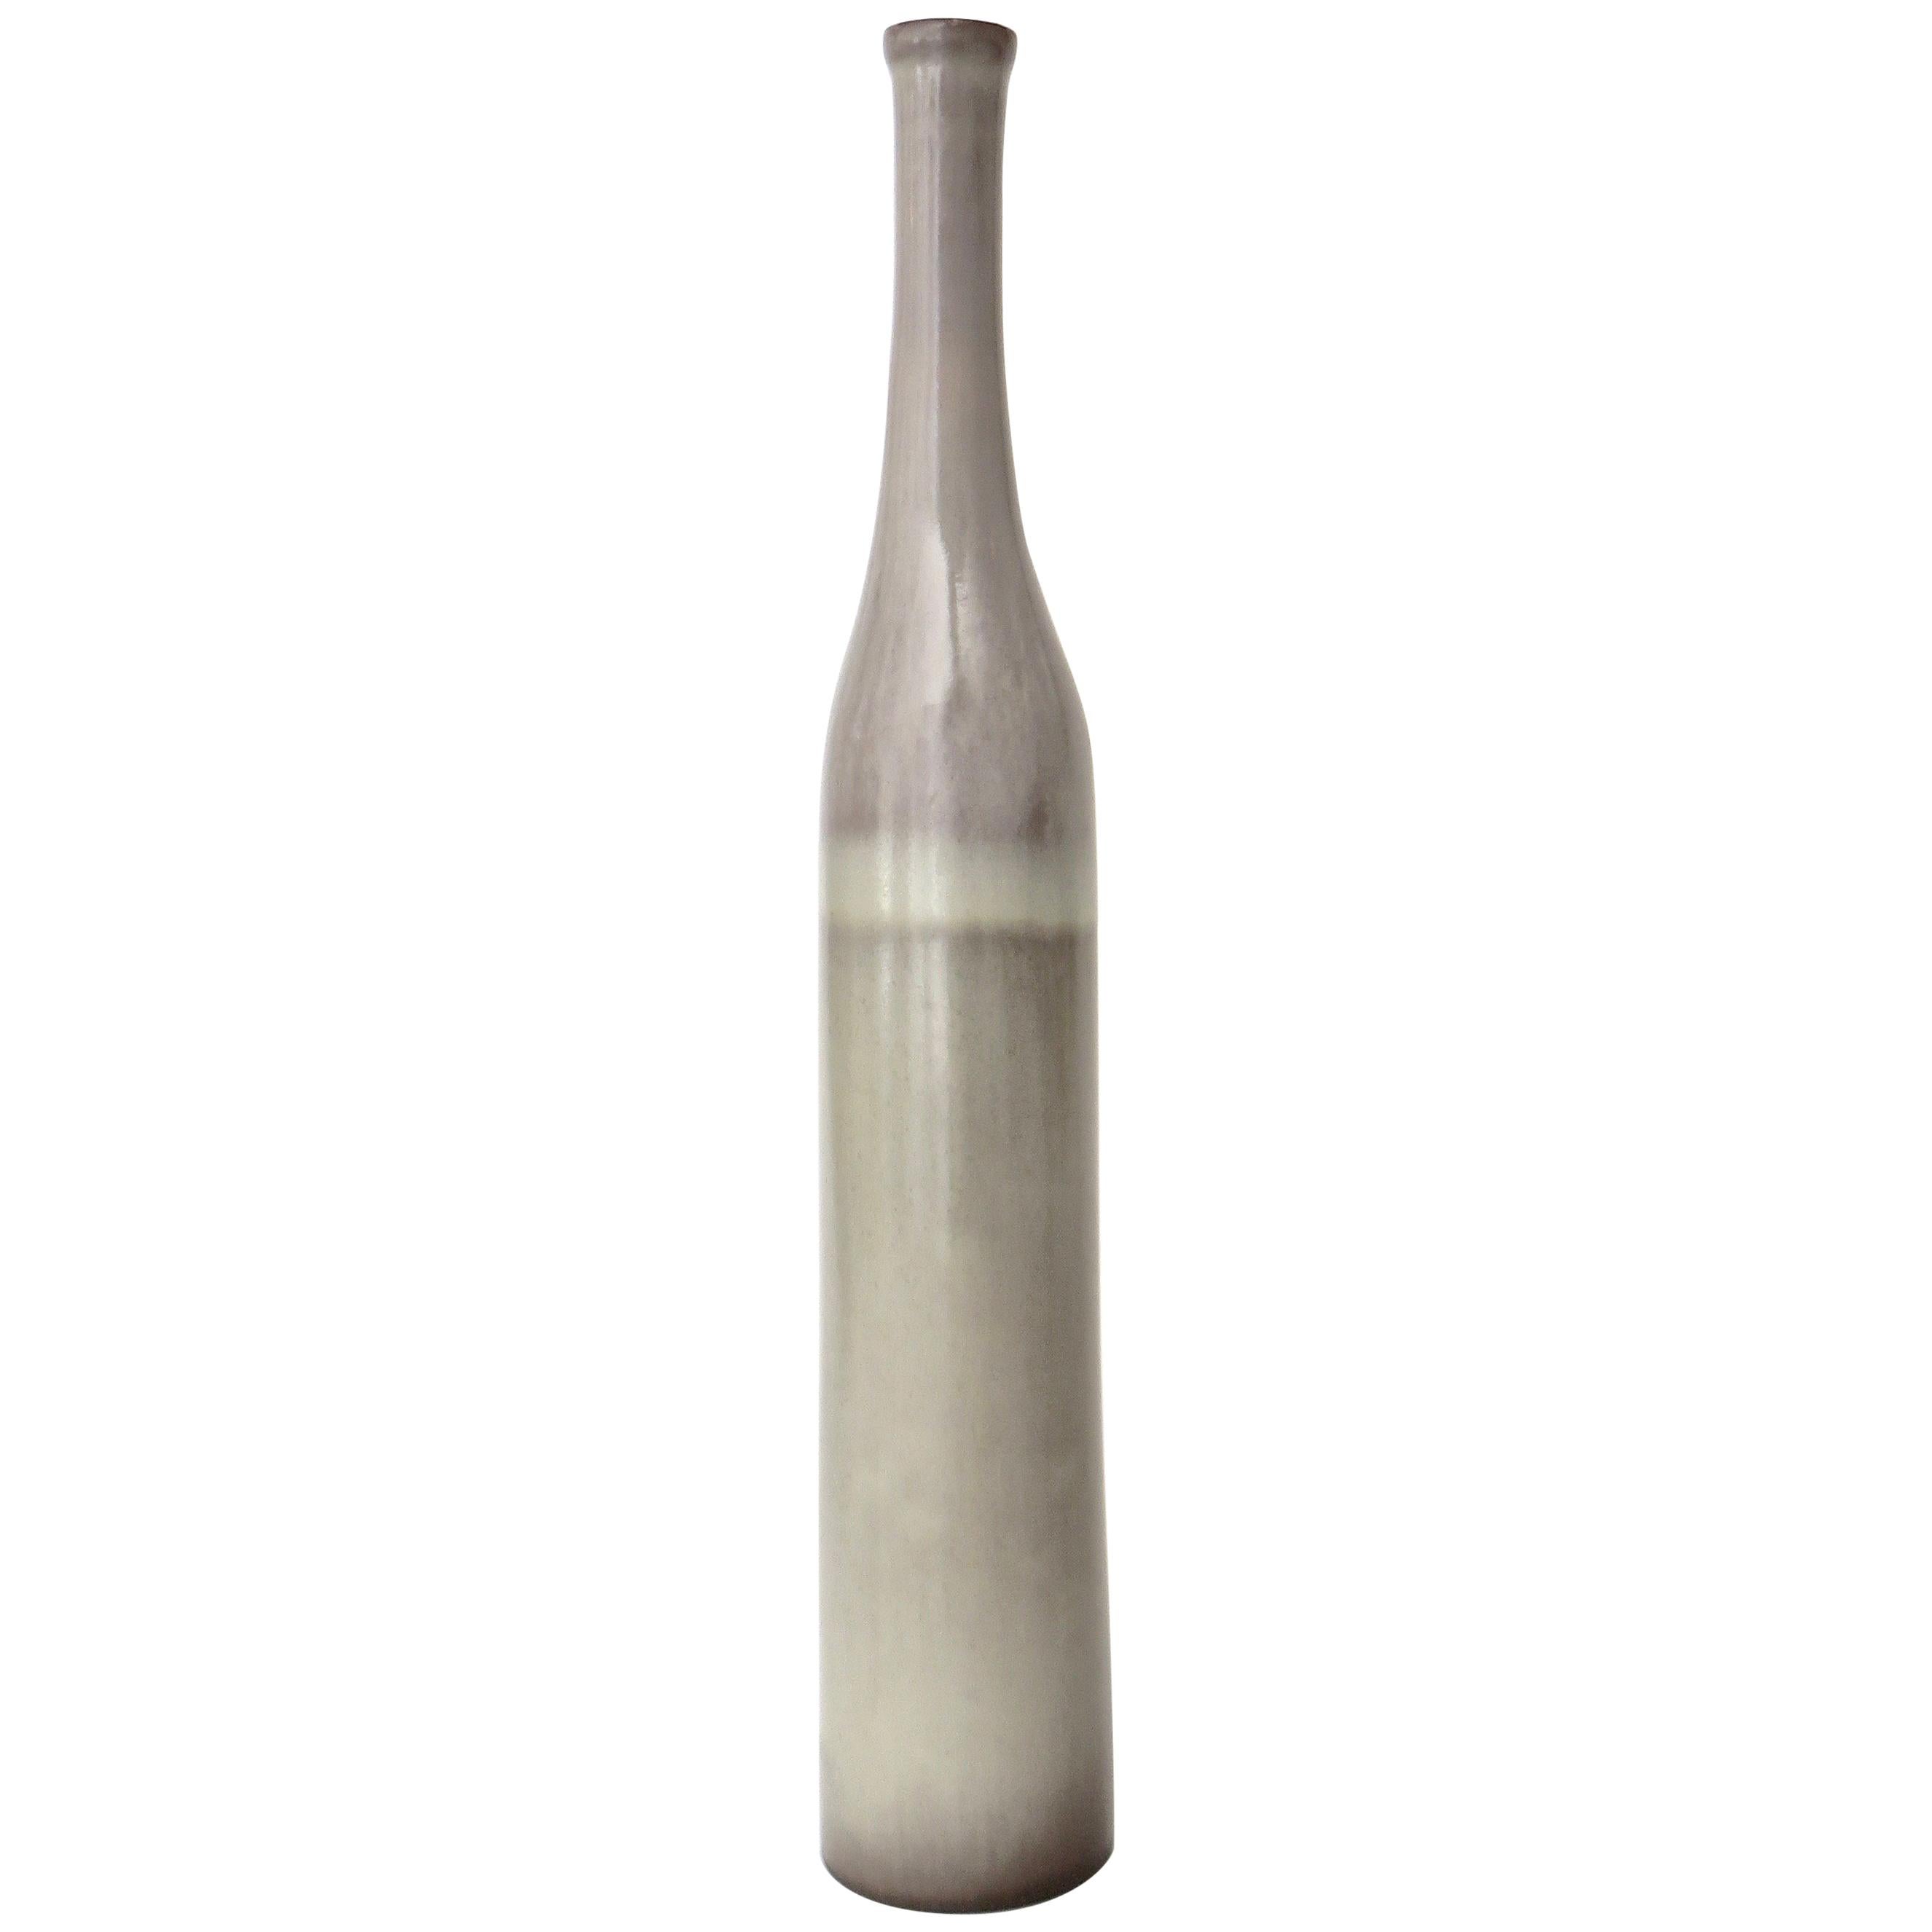 Jacques and Dani Ruelland French Ceramic Bottle In Pale Gray to Lavender Glaze